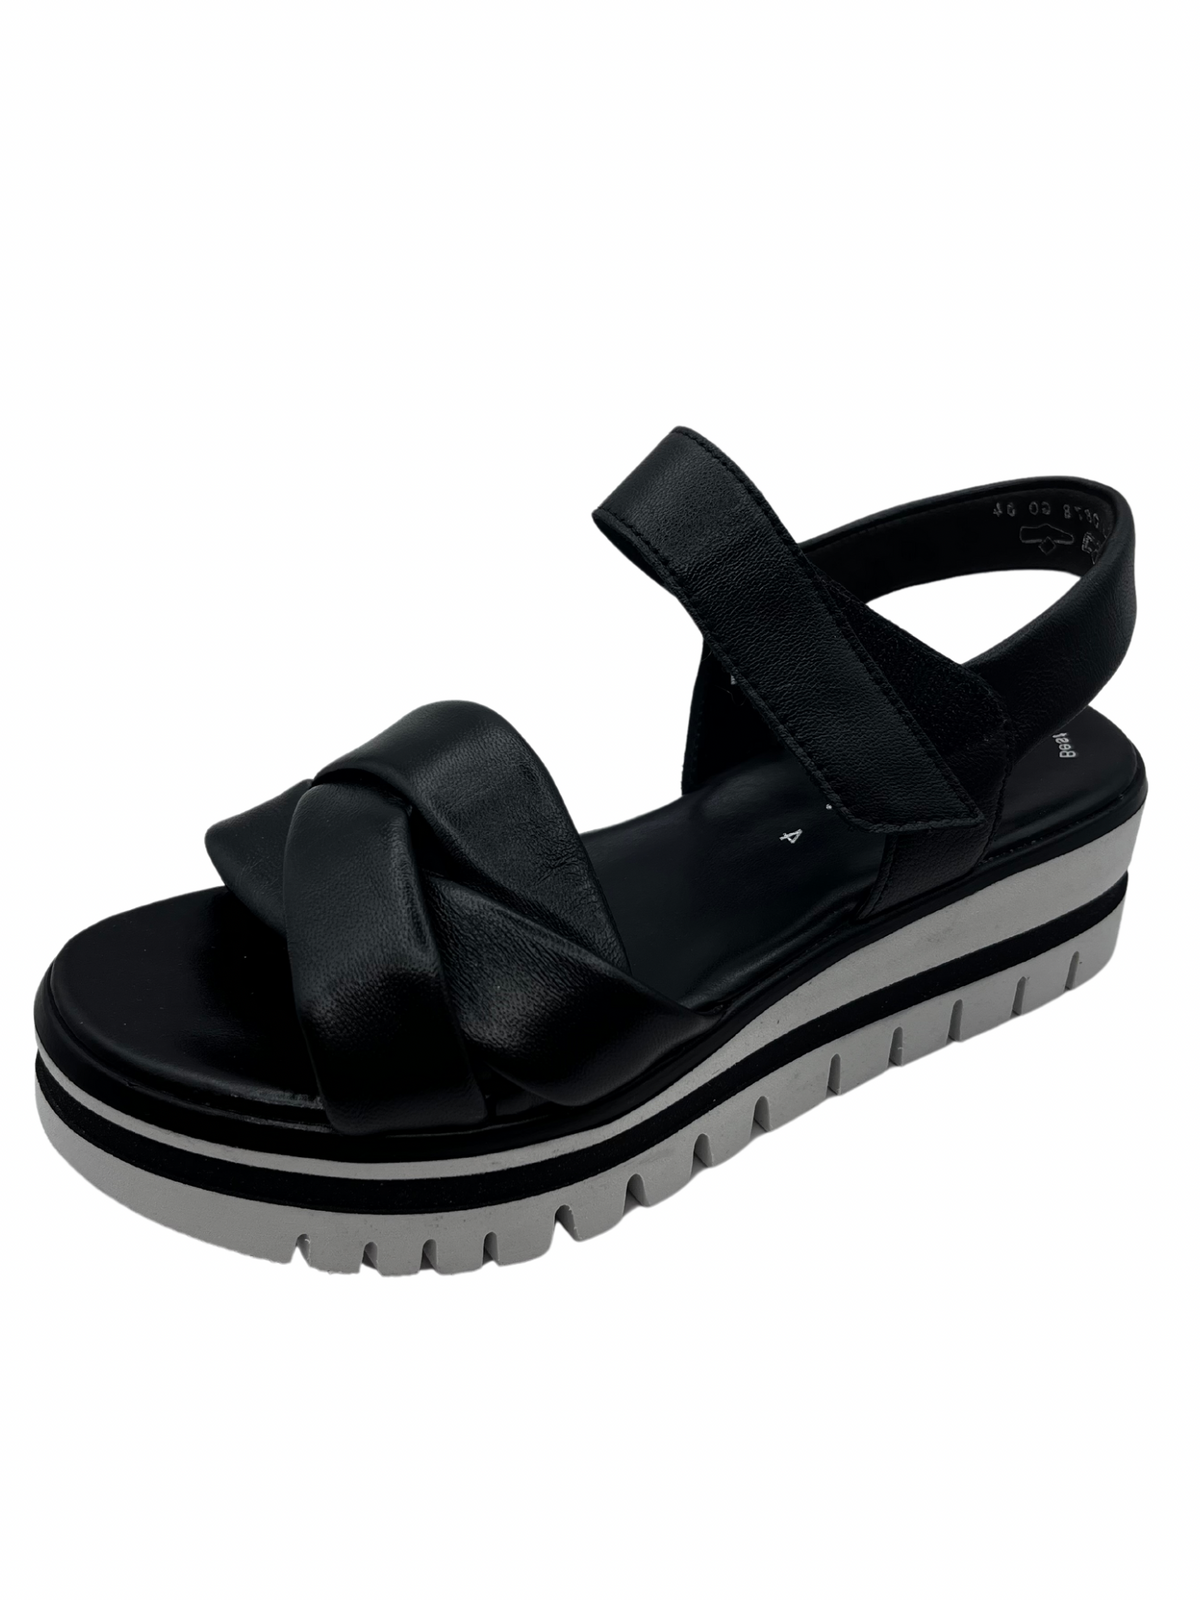 Gabor Black Cross Over Leather Sandals